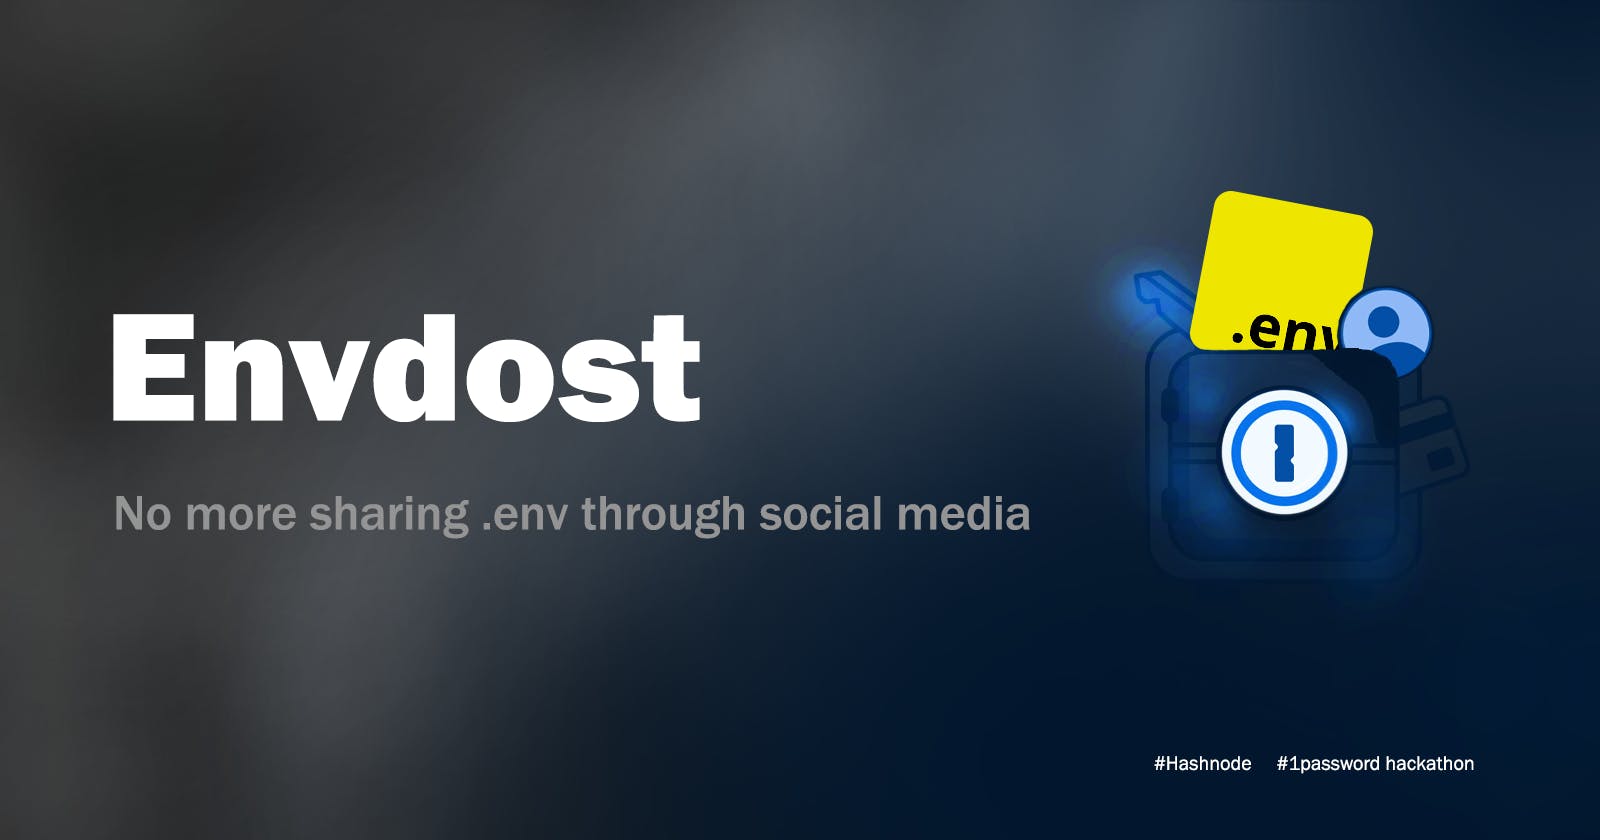 Envdost, the protect your .env with your biometrics and password.